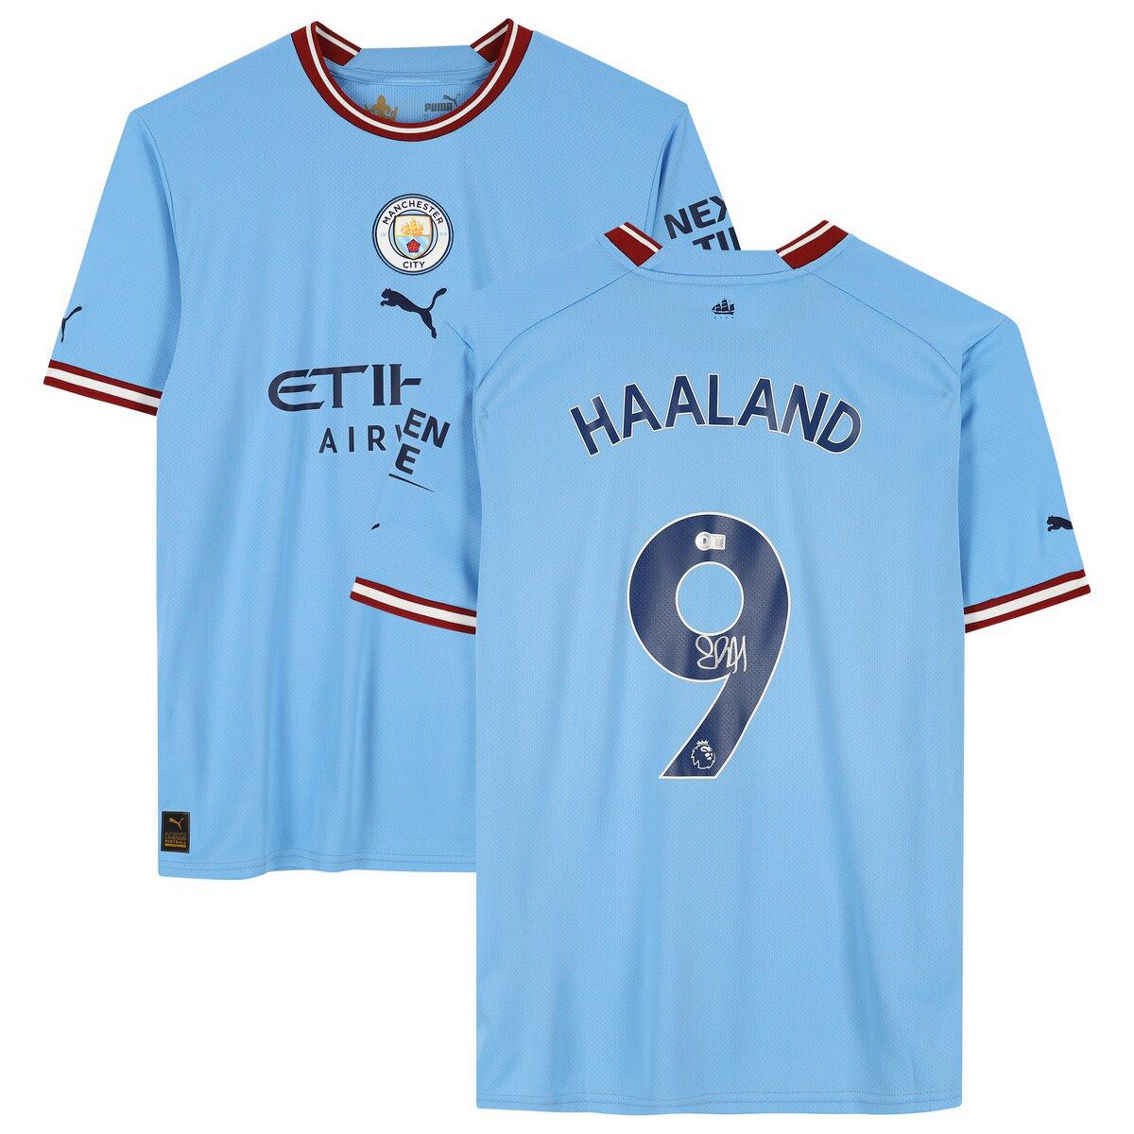 Fanatics Authentic Erling Haaland Blue Manchester City Autographed 2022-23 Home Jersey - Image 2 of 4